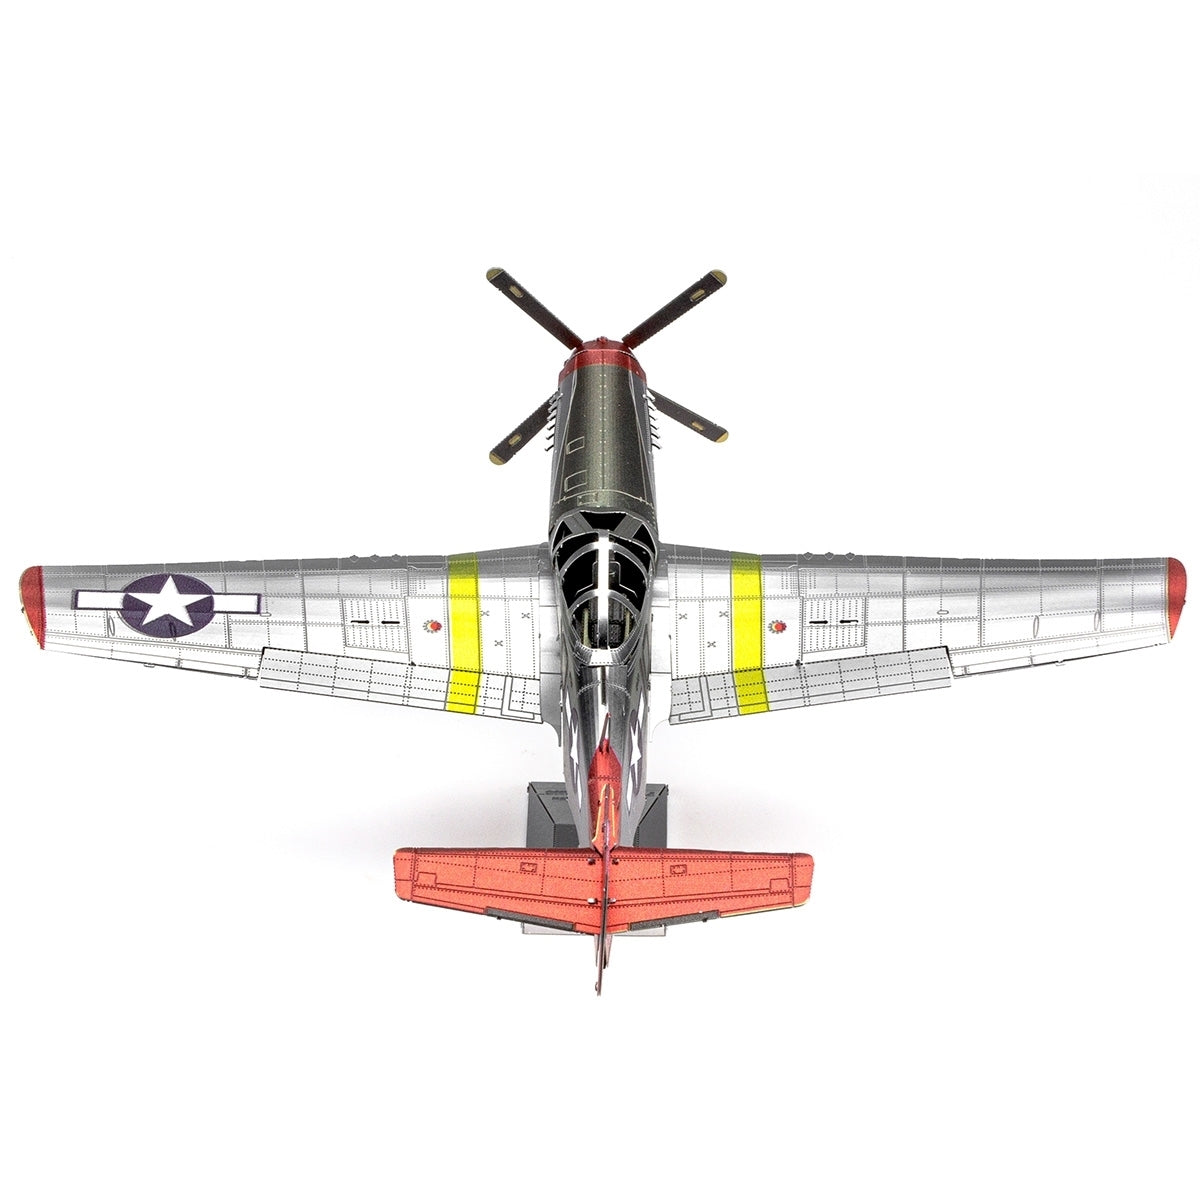 ICONX -  Tuskegee Airmen P-51D Mustang